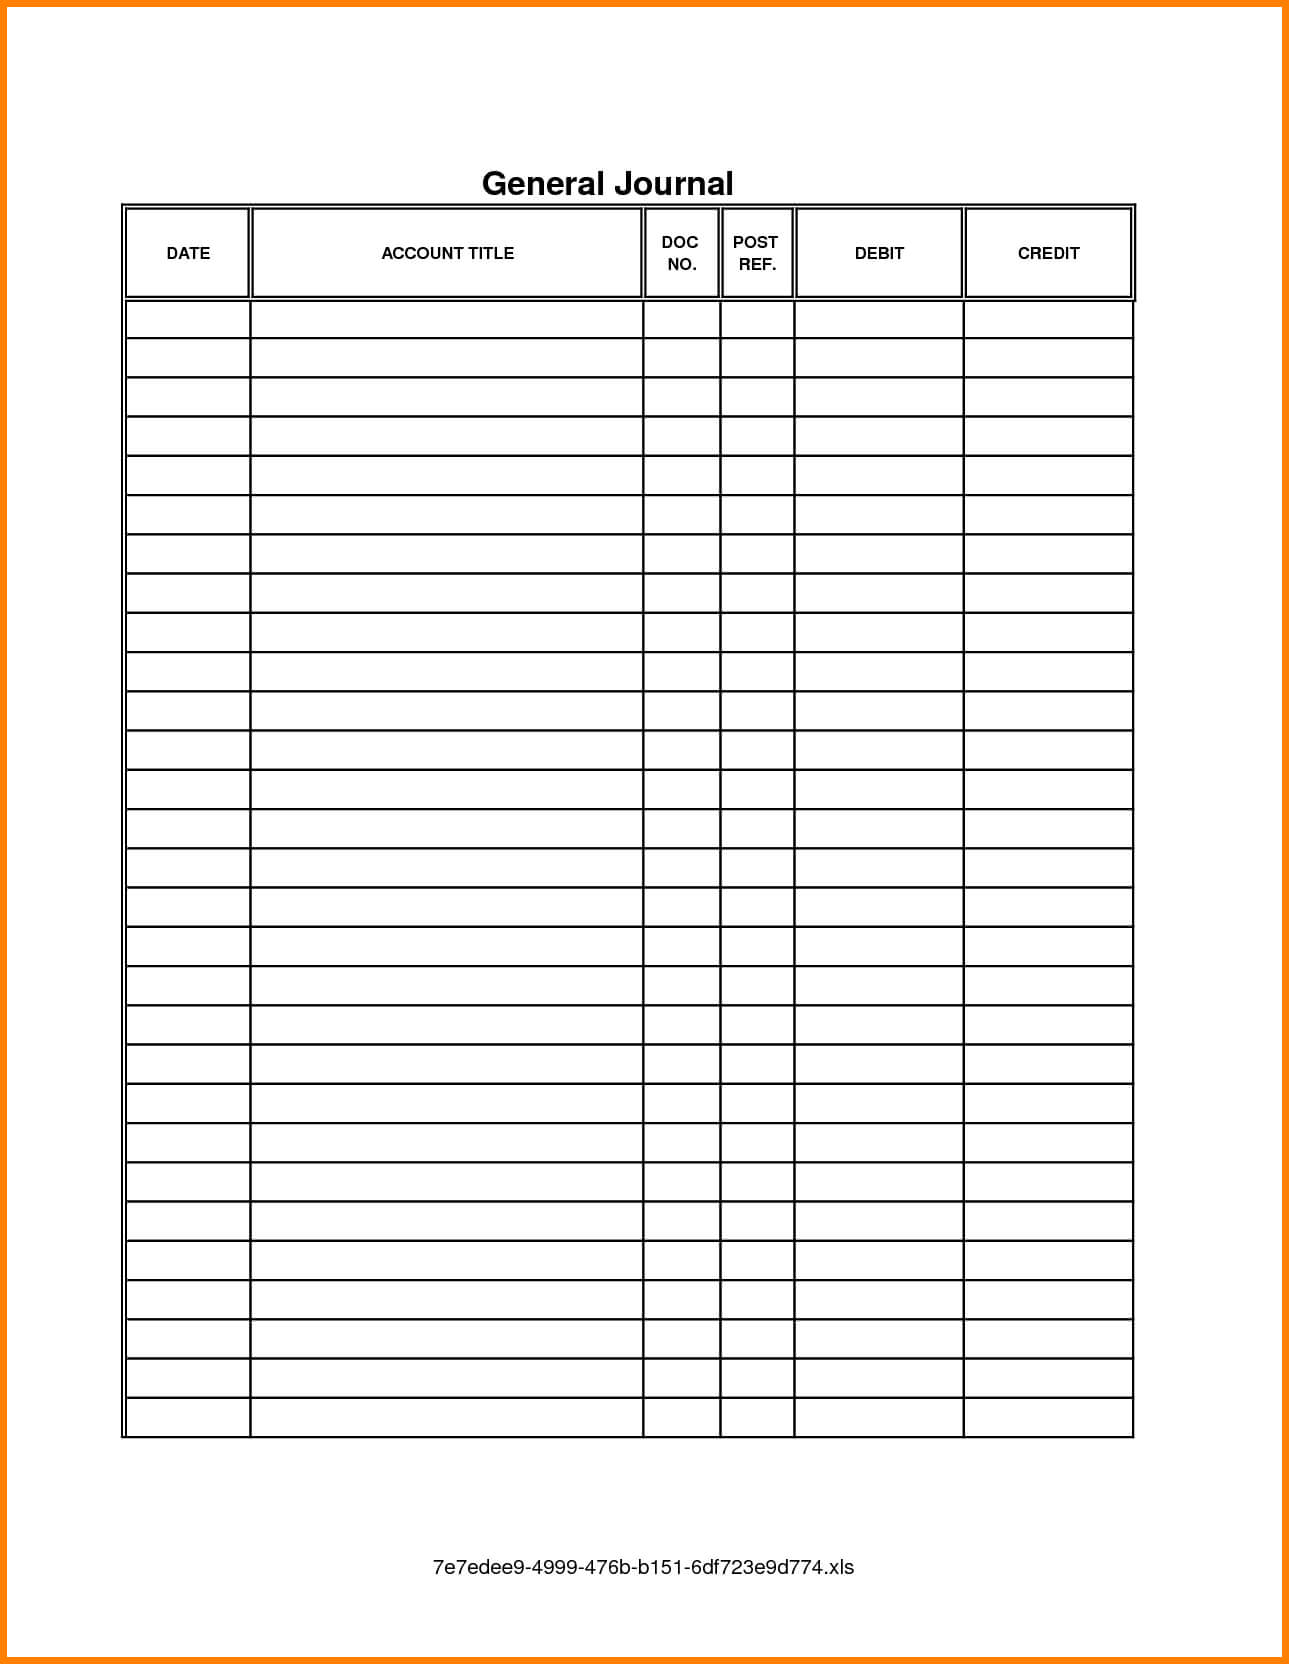 012 Template Ideas General Journal Ledger Accounting In Double Entry Journal Template For Word